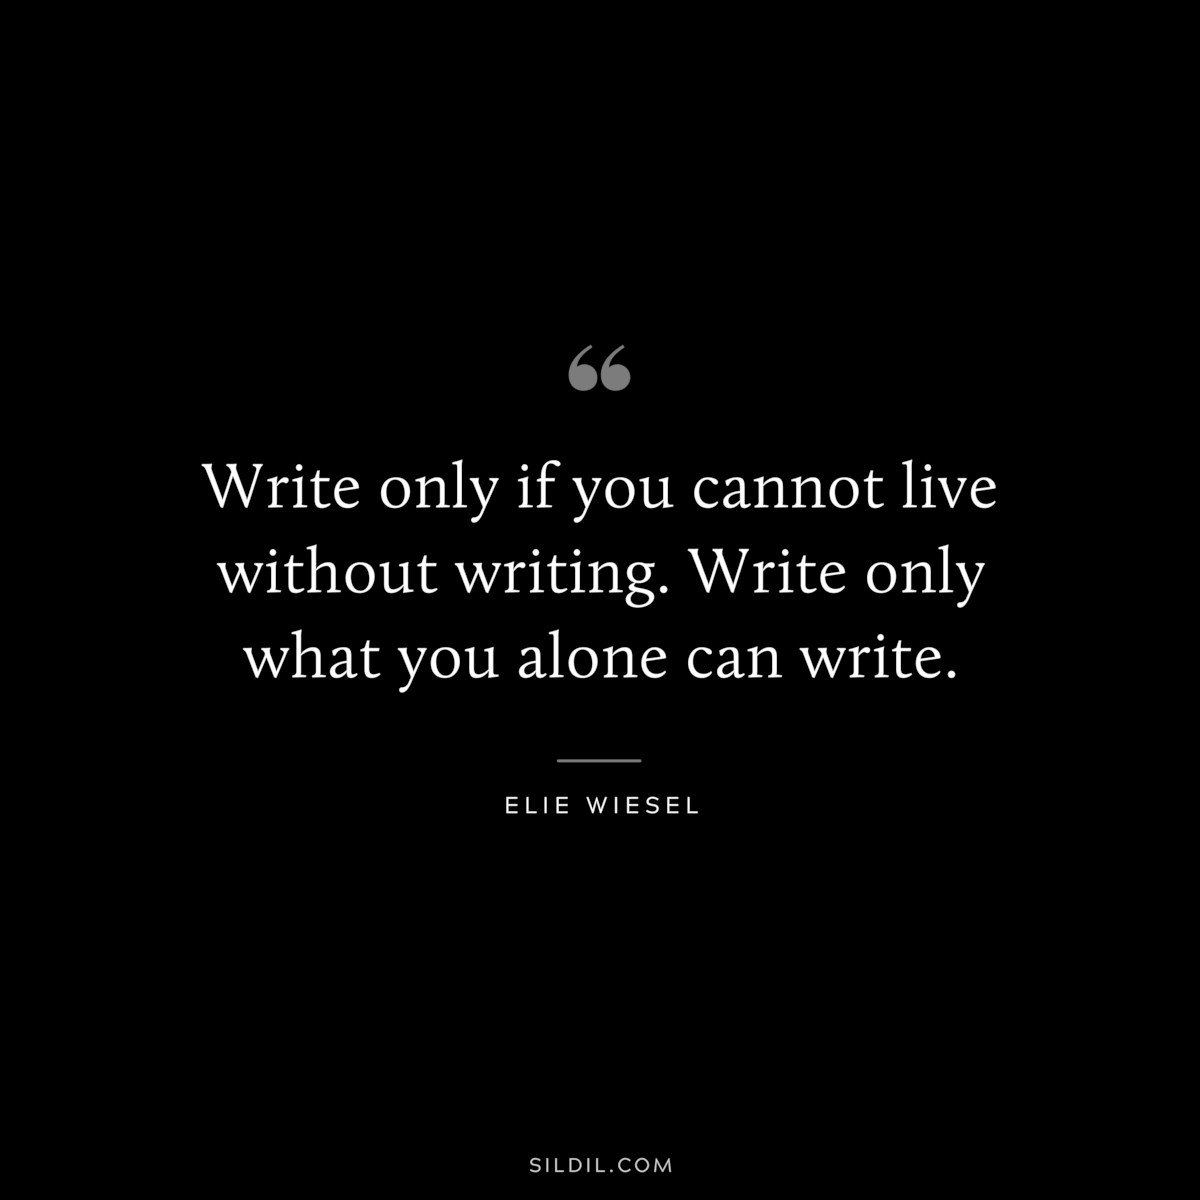 Write only if you cannot live without writing. Write only what you alone can write. ― Elie Wiesel